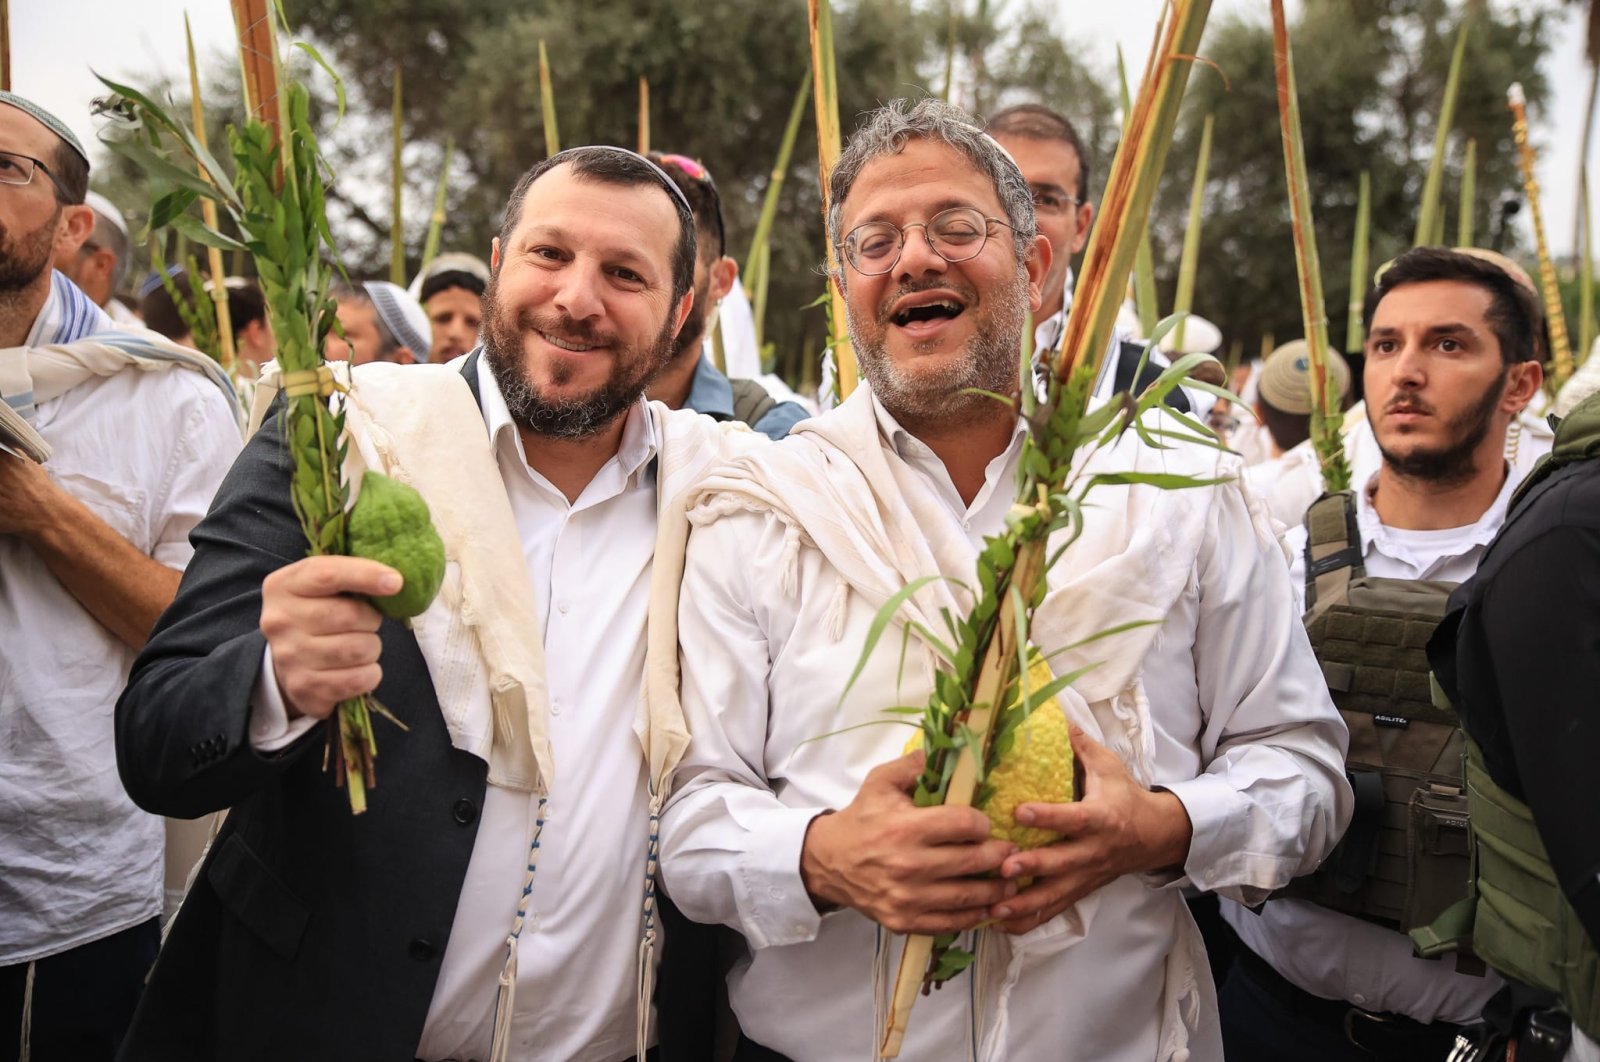 Israeli Heritage Minister Amichay Eliyahu (L) poses with far-right National Security Minister Itamar Ben Gvir, west Jerusalem, Oct. 3, 2023. (Amichay Eliyahu on X)